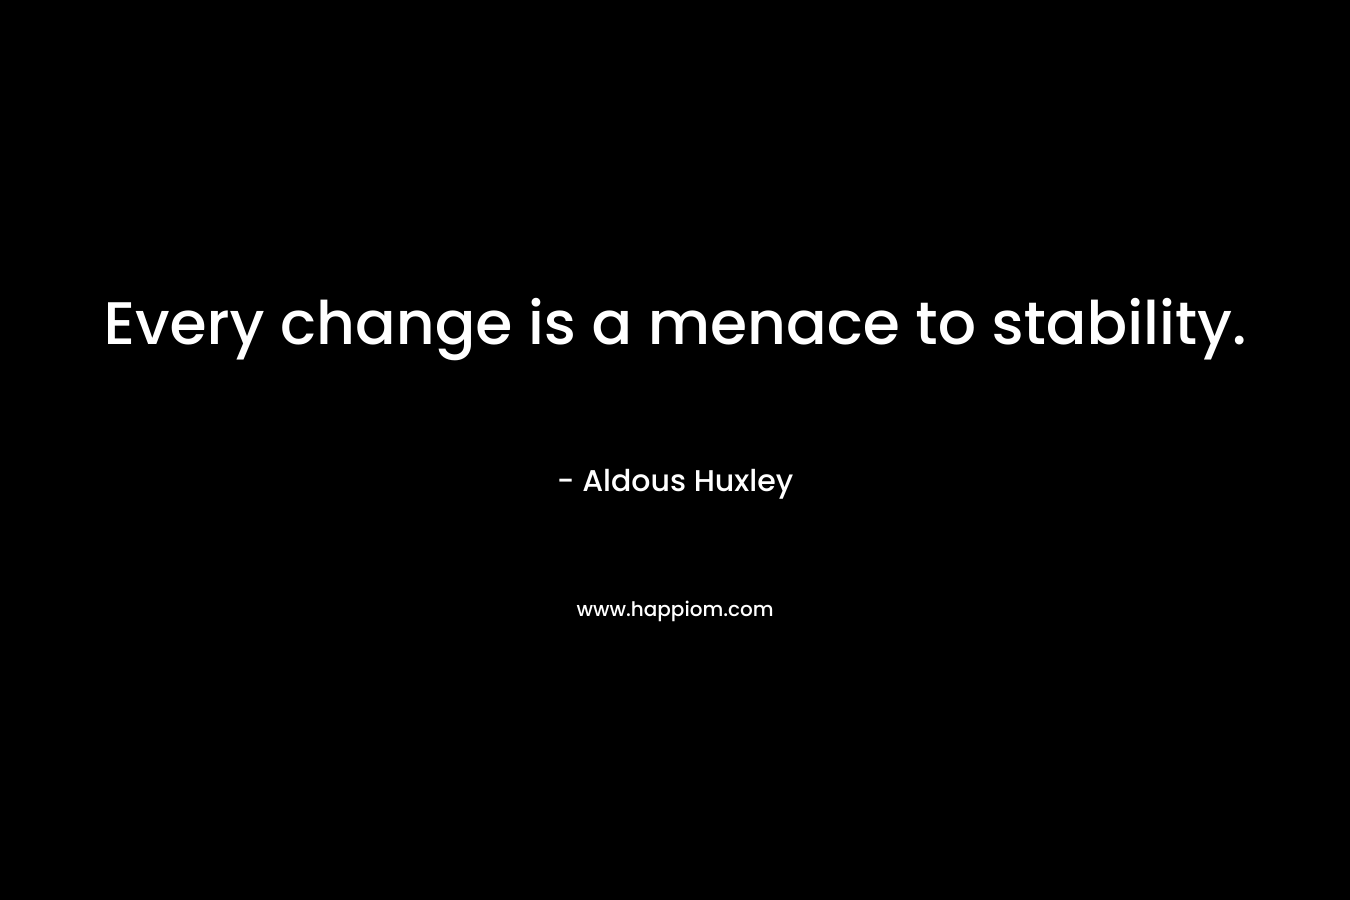 Every change is a menace to stability.